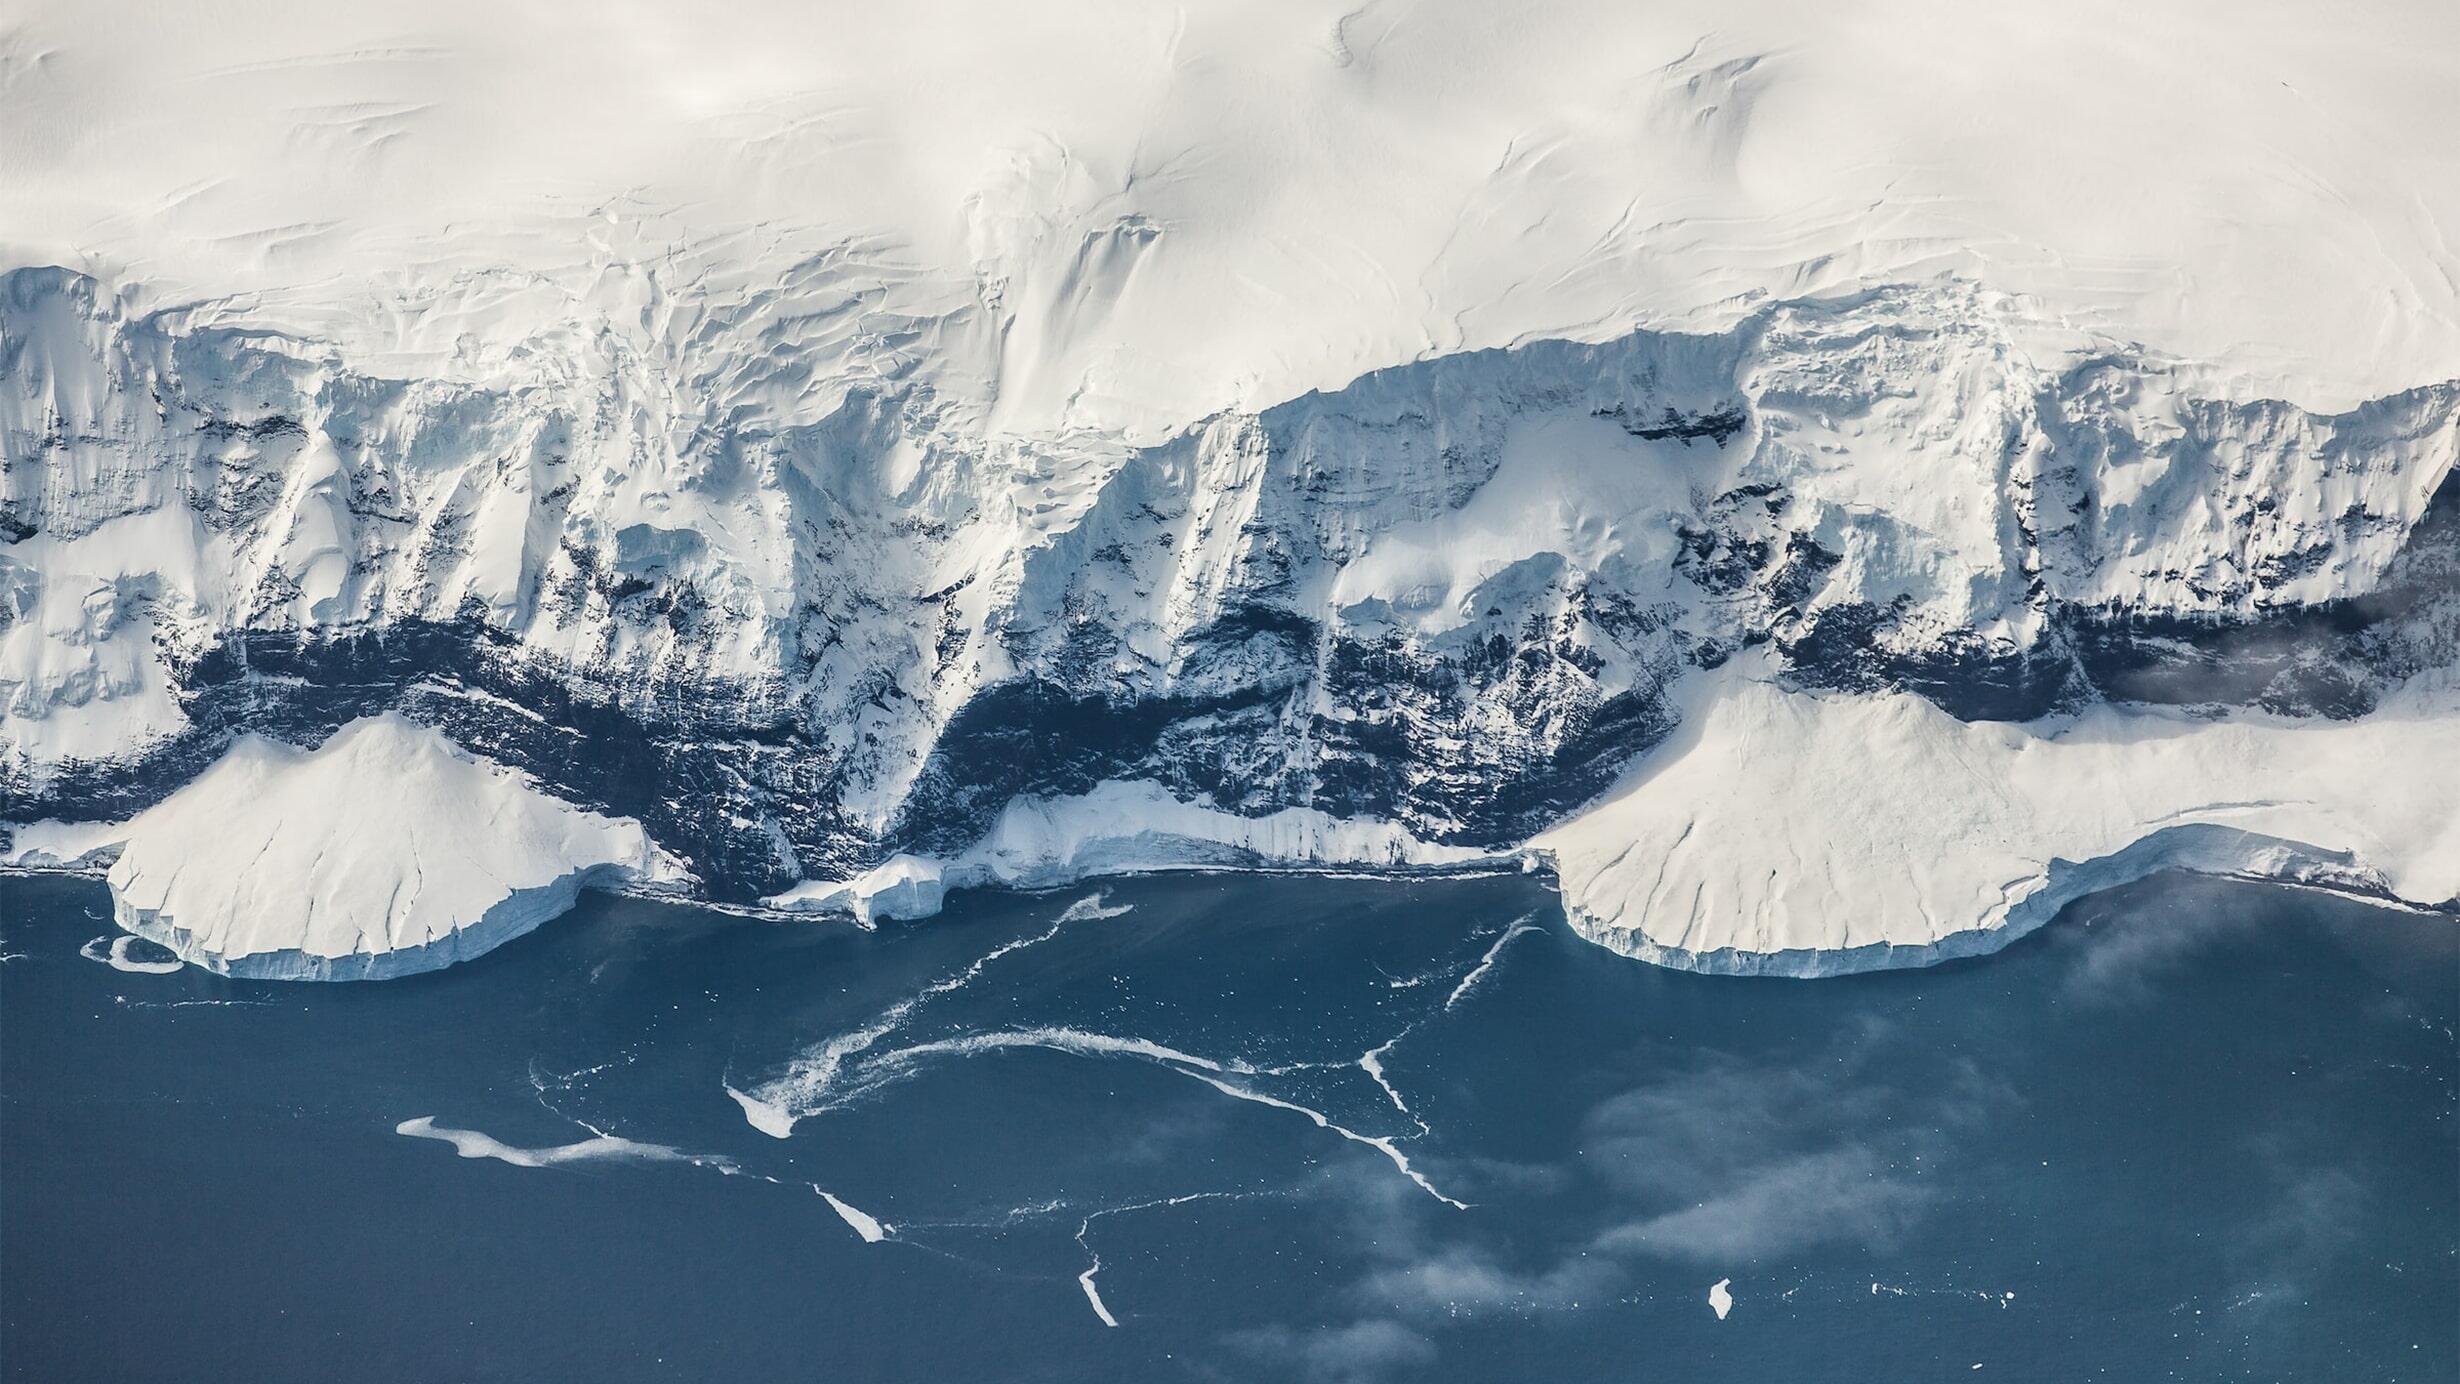 An aerial photograph of glacial ice at the edge of a small island, off the coast of Antarctica, meeting the Southern Ocean.